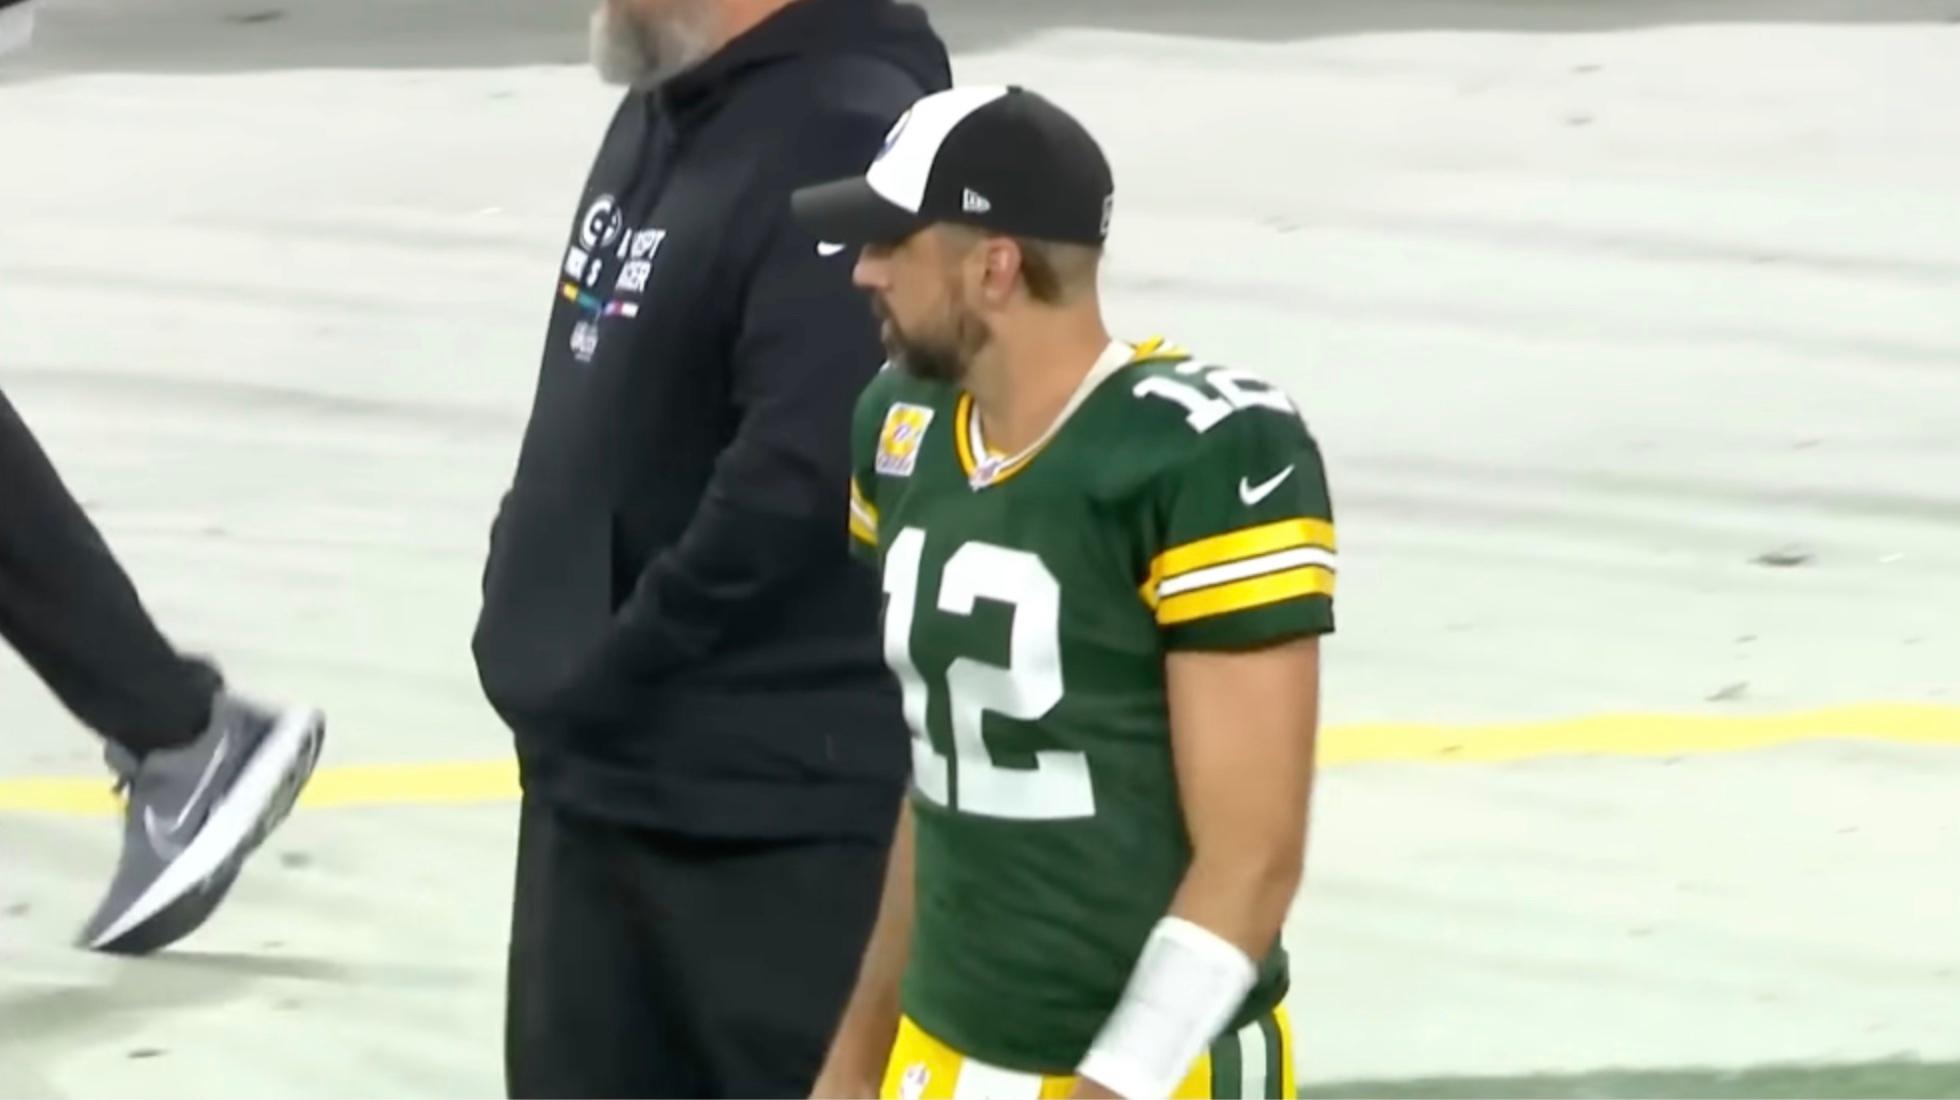 Aaron Rodgers is getting roasted over his haircut.